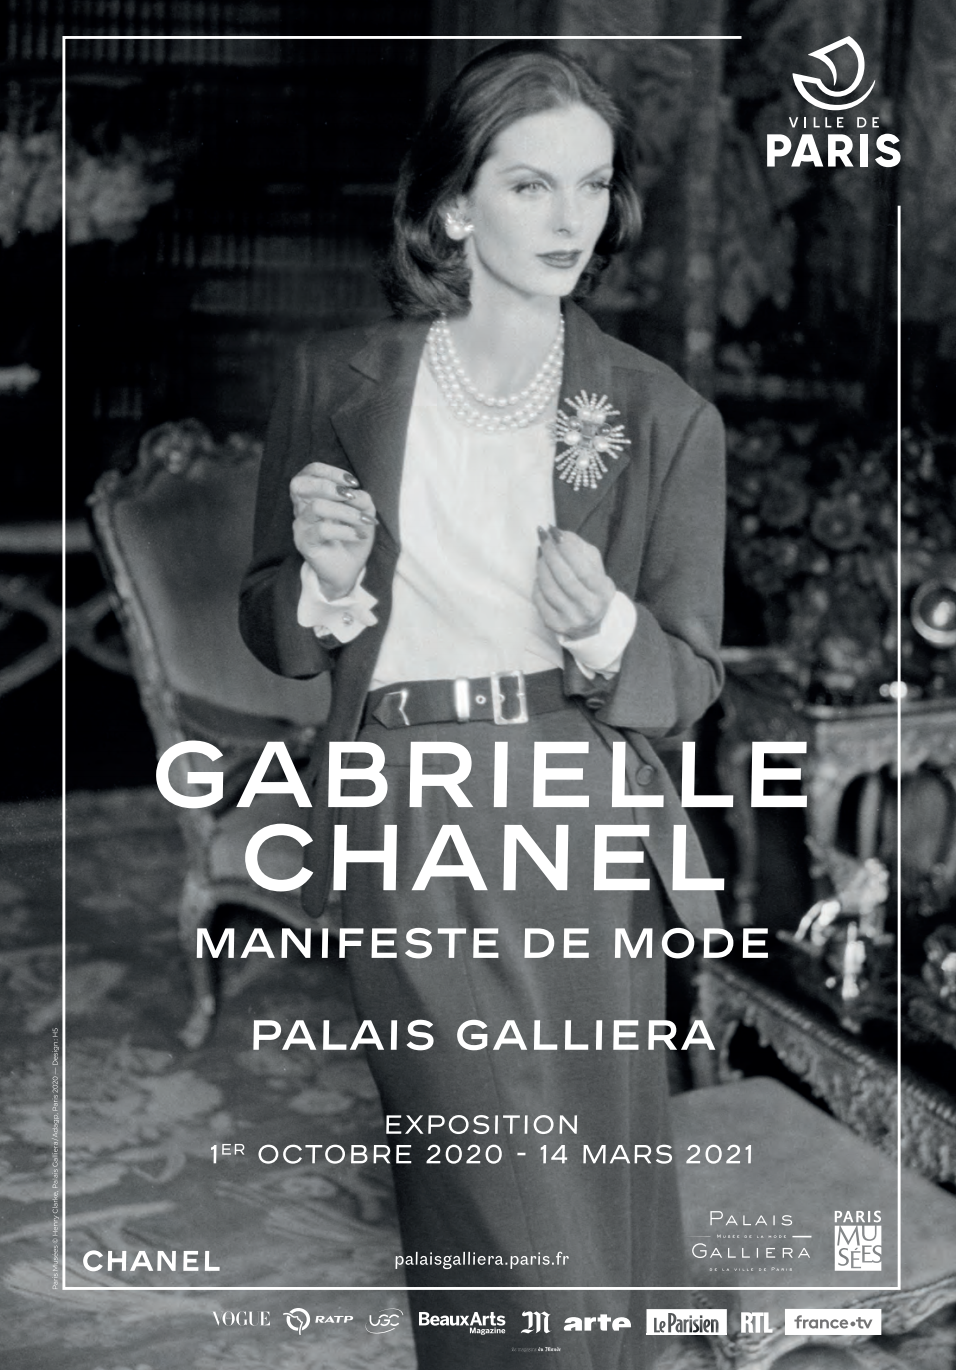 MUSEUM REOPENING AND EXHIBITION GABRIELLE CHANEL FASHION MANIFESTO